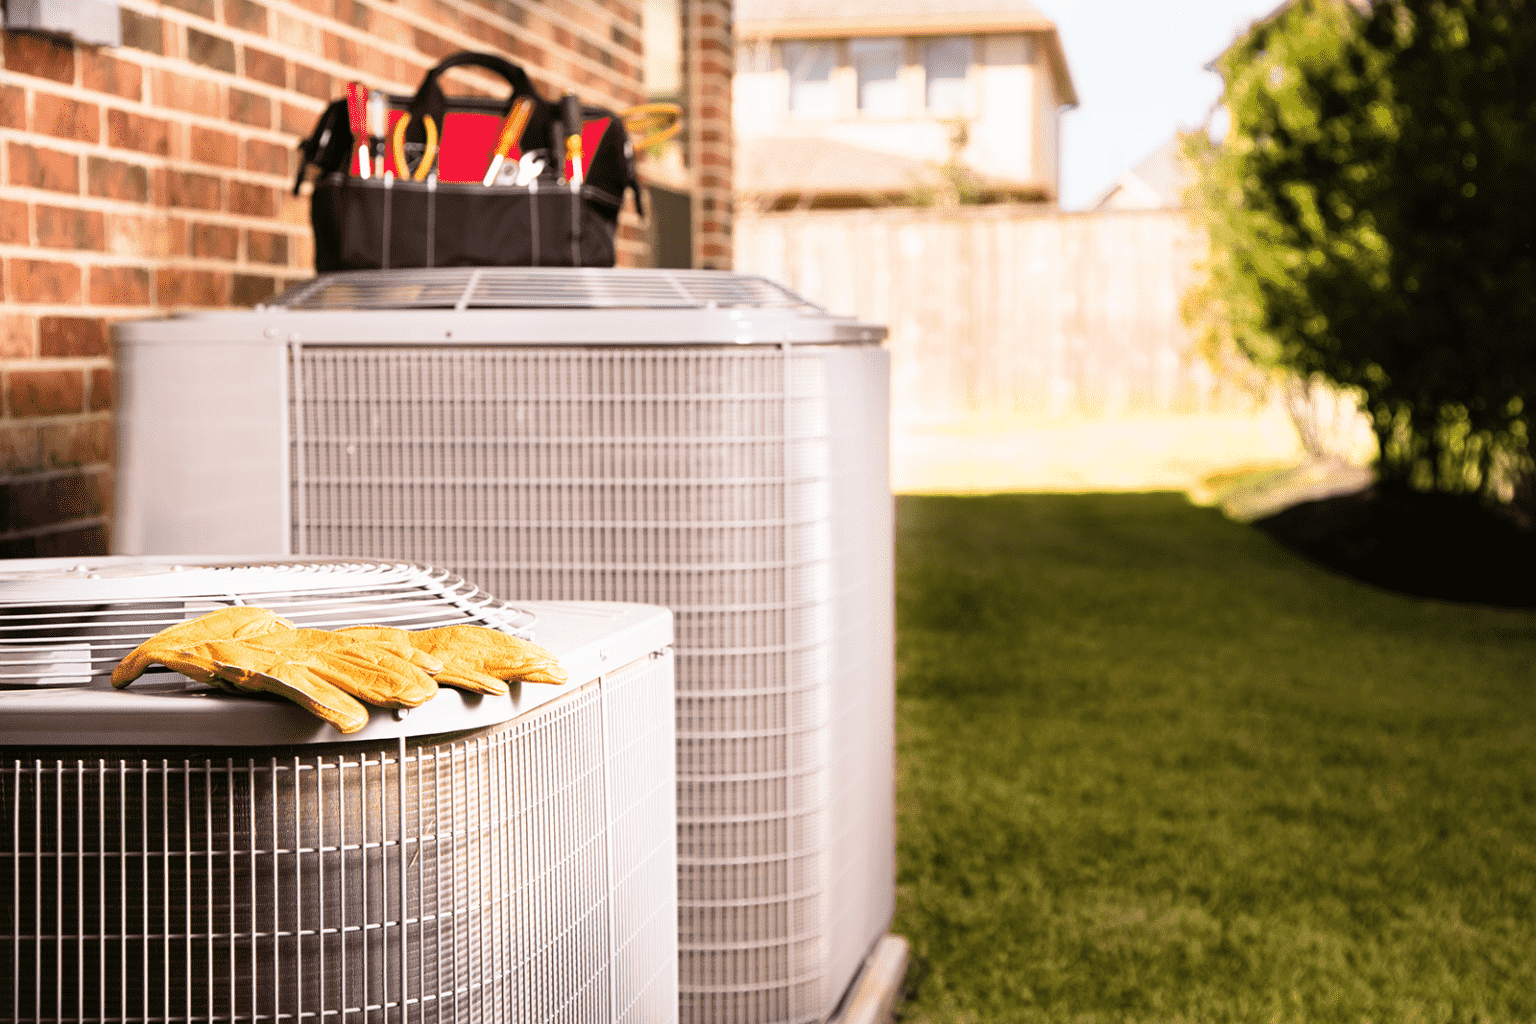 one stop cooling and heating tampa, air conditioning repair tampa, tampa air conditioning repair 24 hour, northside air conditioning tampa, air conditioning service tampa, budget ac tampa, budget heating & ac inc tampa fl, expert & quality ac, tampa